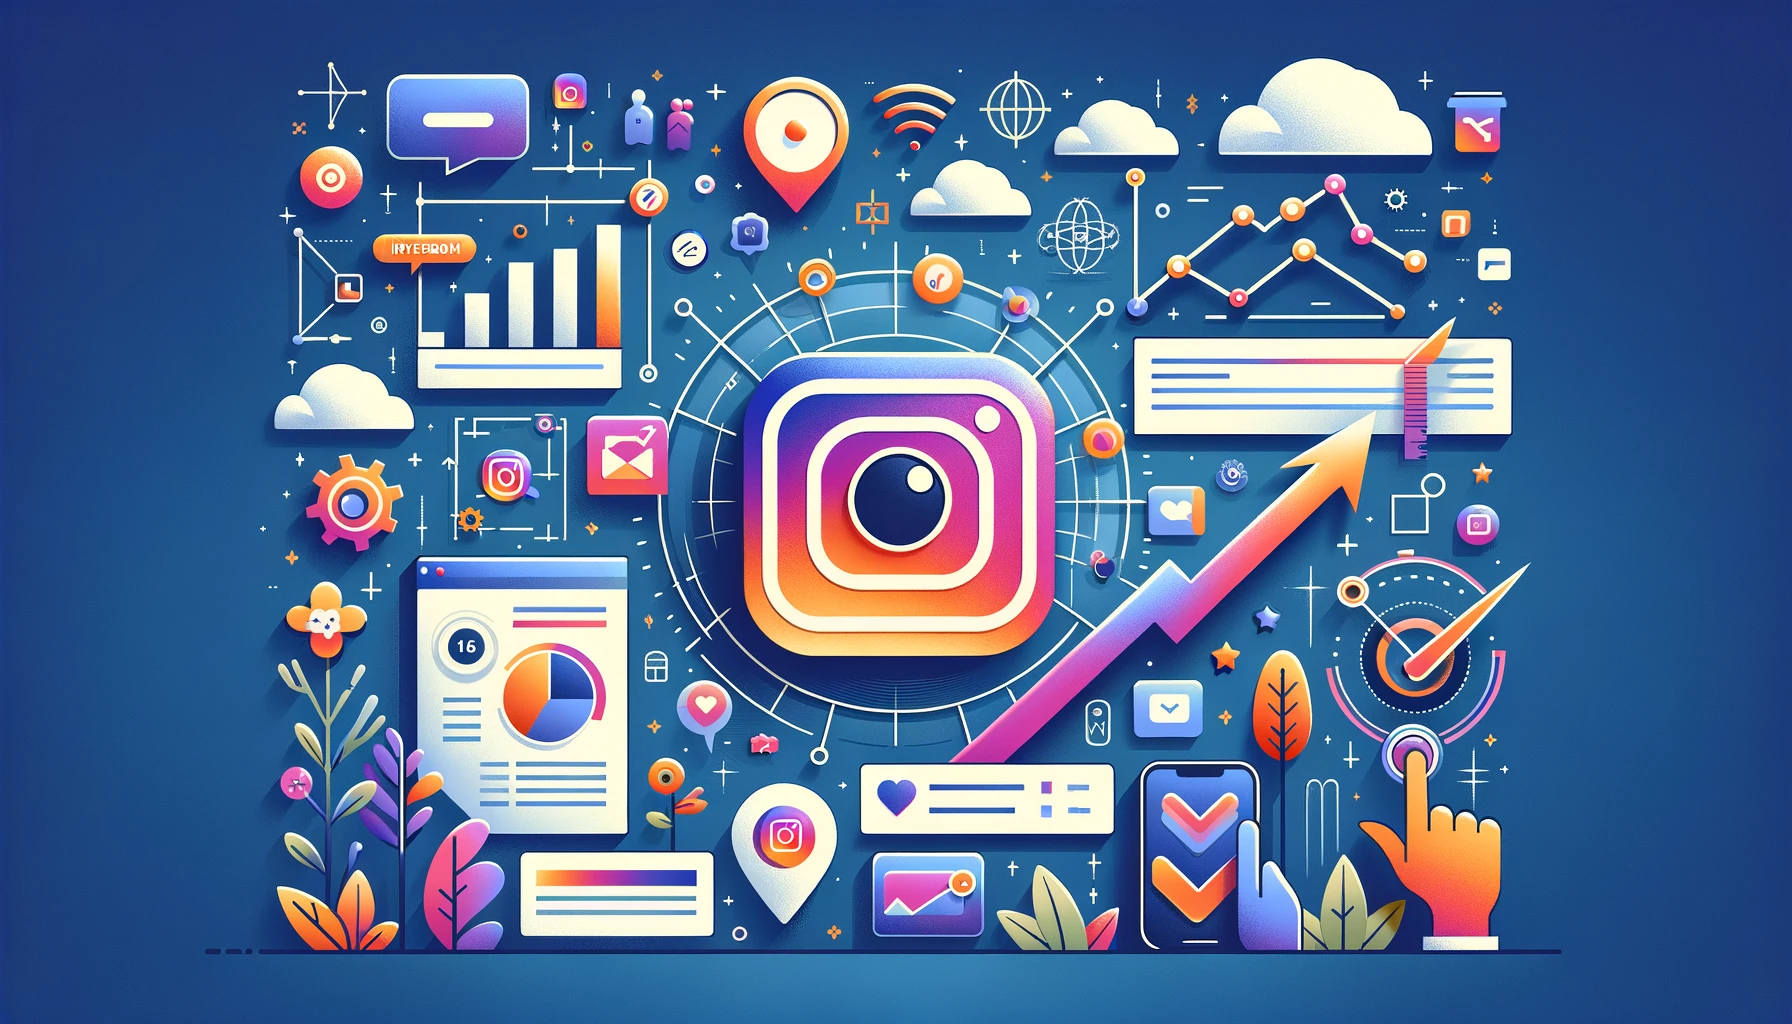 amplify-your-brand-mastering-instagram-image-with-rank-panels-expertise